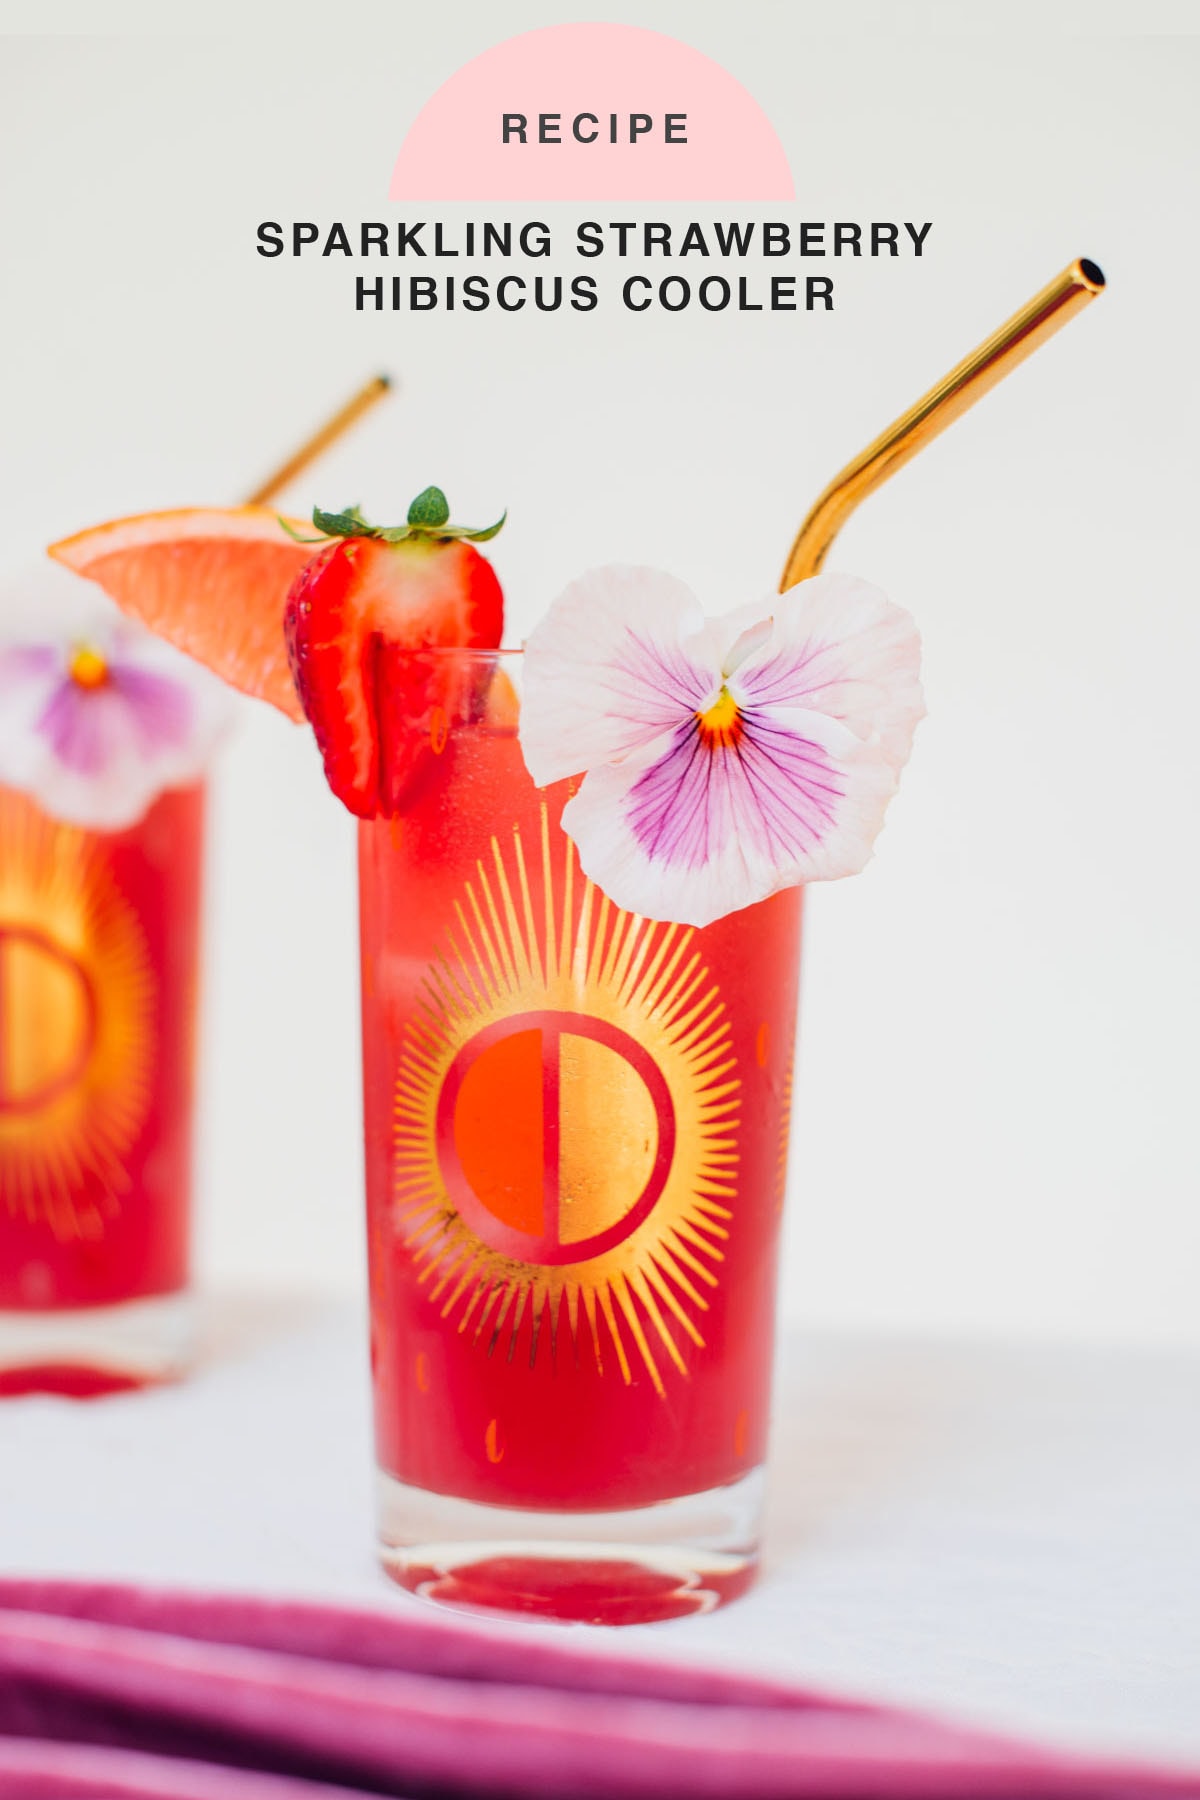 ECIPE Mother's Day Brunch Sparkling Strawberry Hibiscus Cooler by top Houston lifestyle blogger Ashley Rose of Sugar & Cloth